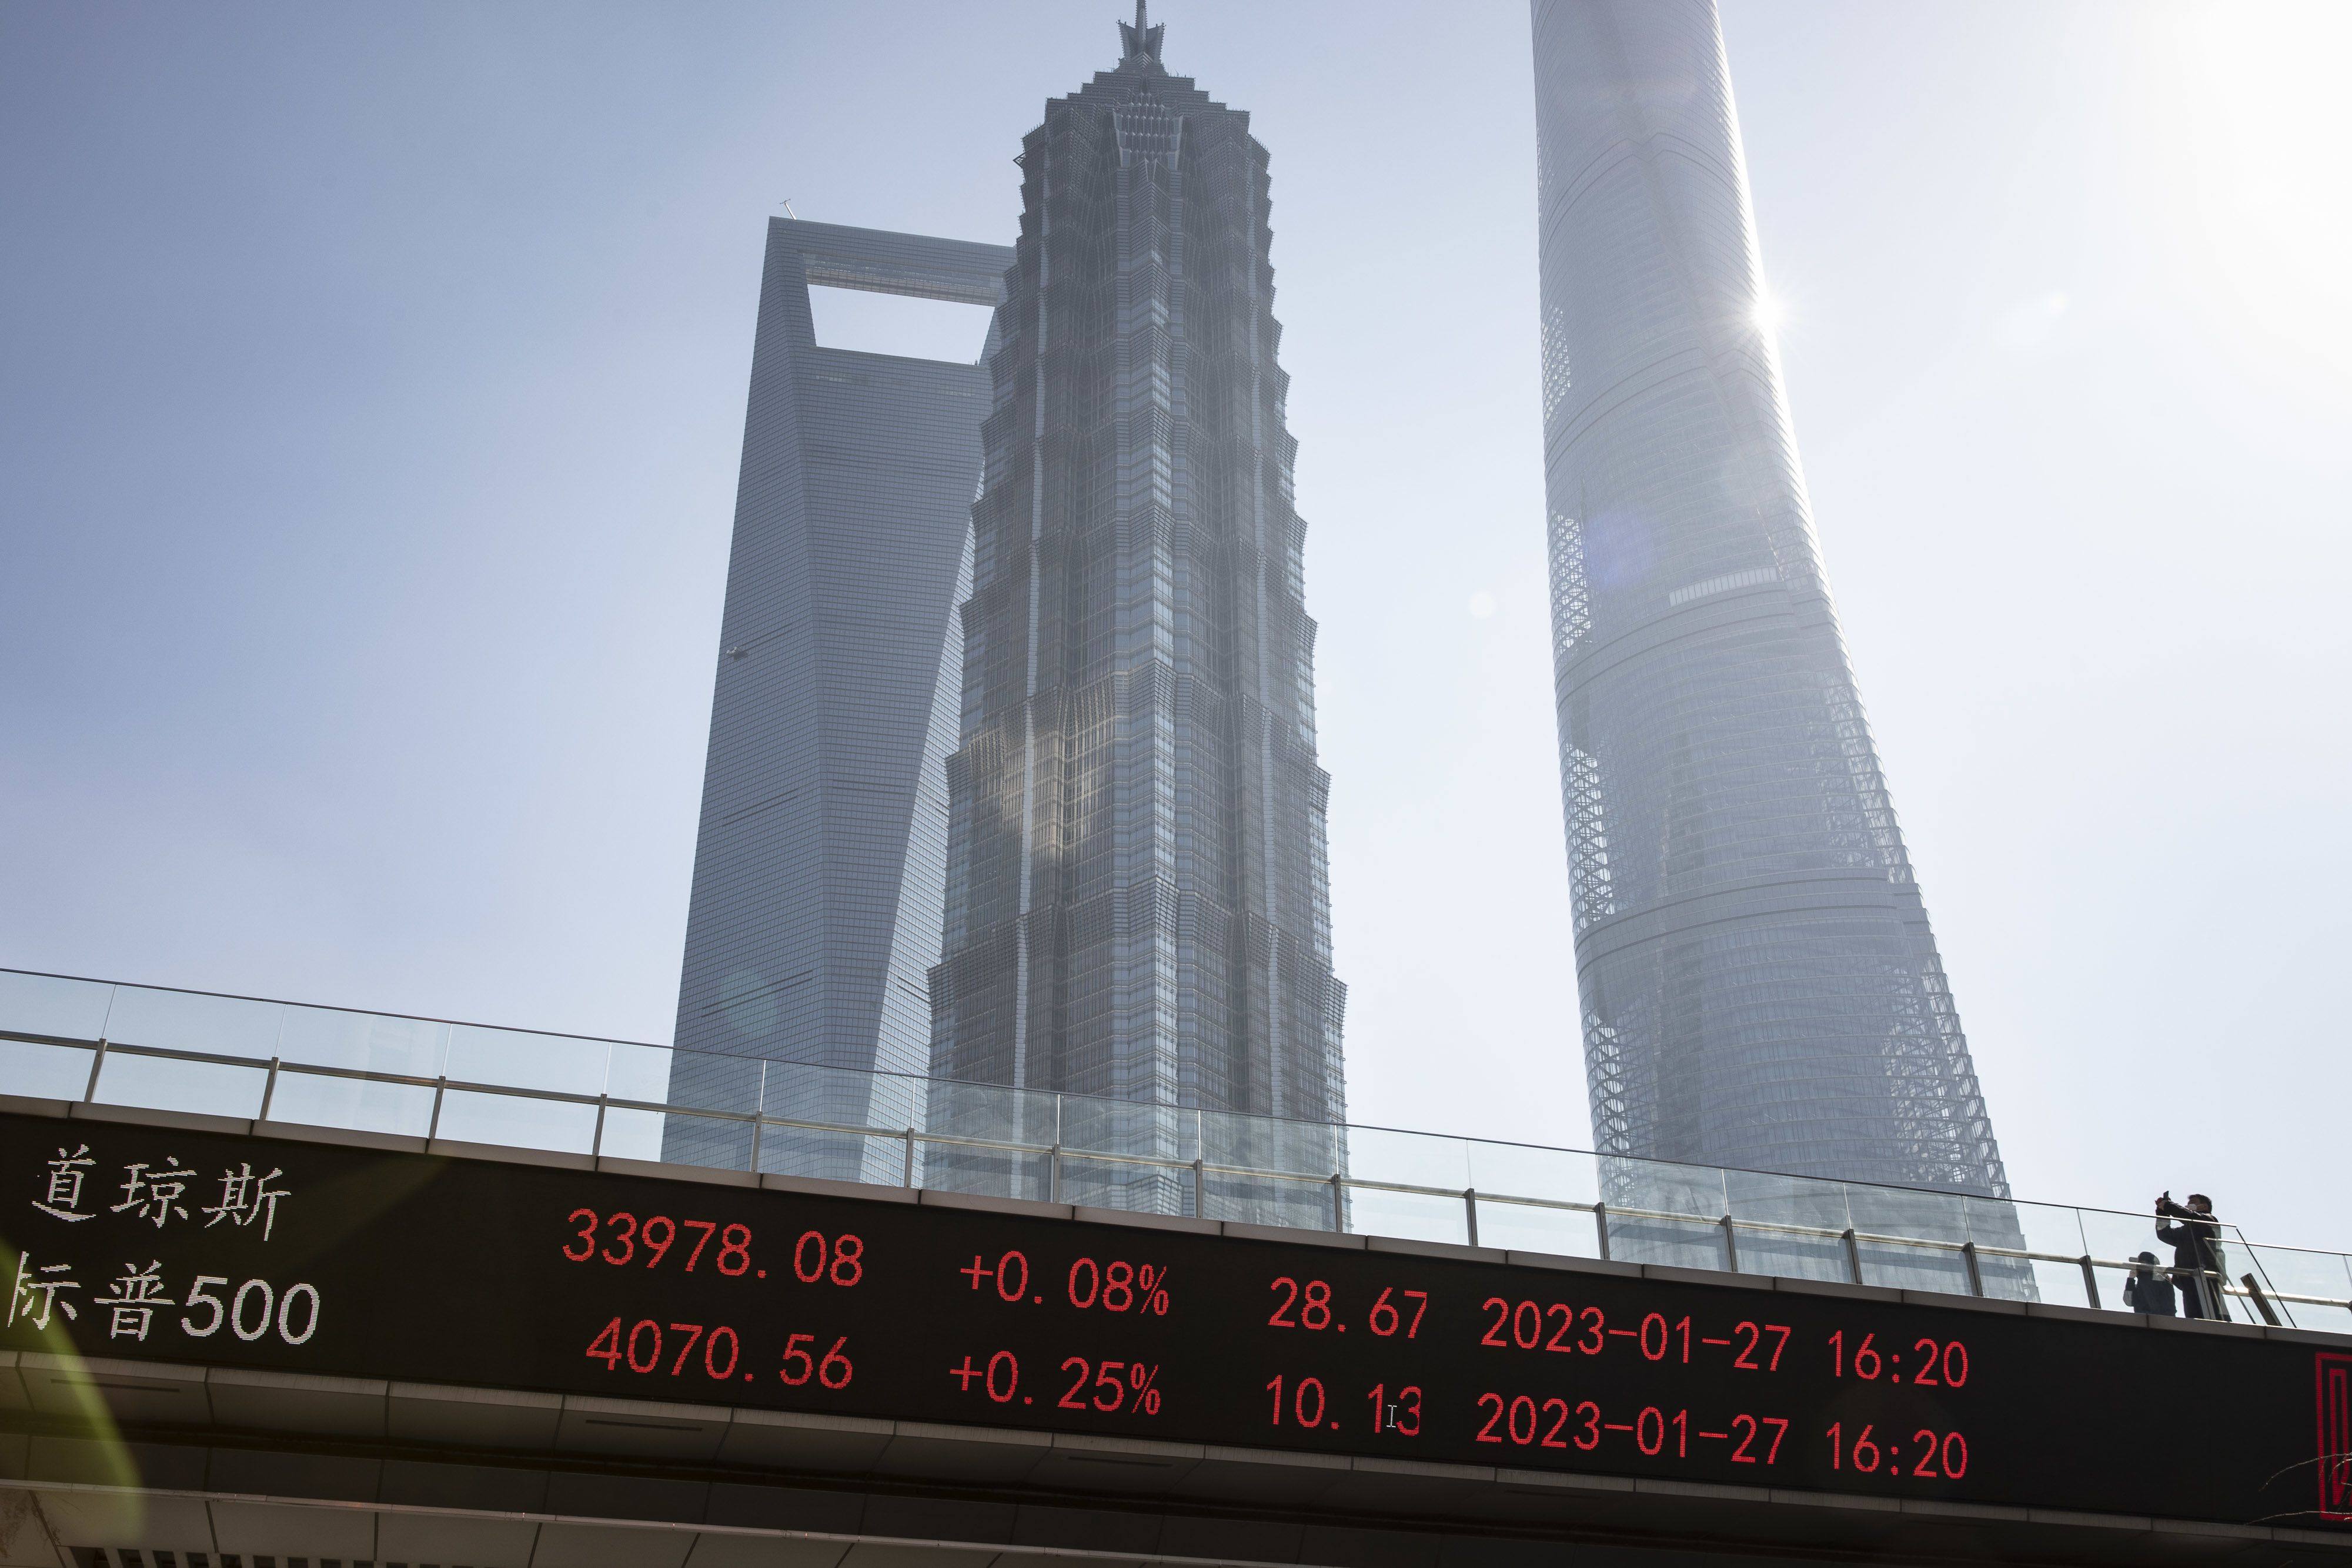 Shanghai’s Lujiazui financial district. China is the ‘most important ascending power’ for investors to understand, Ray Dalio said in a LinkedIn post last week. Photo: Bloomberg